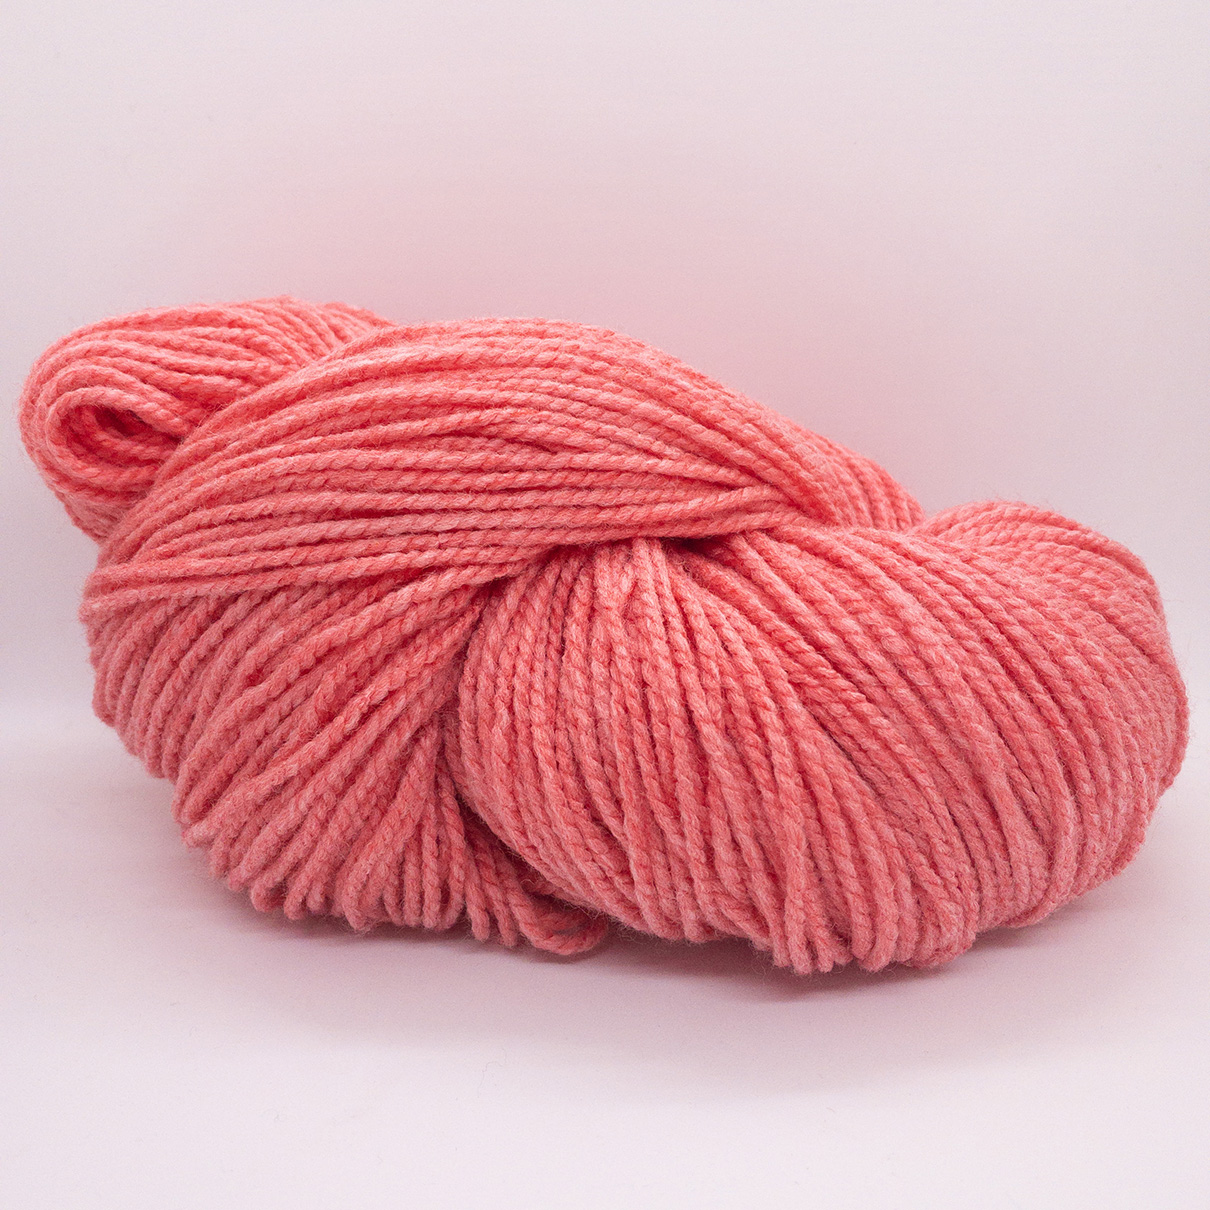 28 – Coral